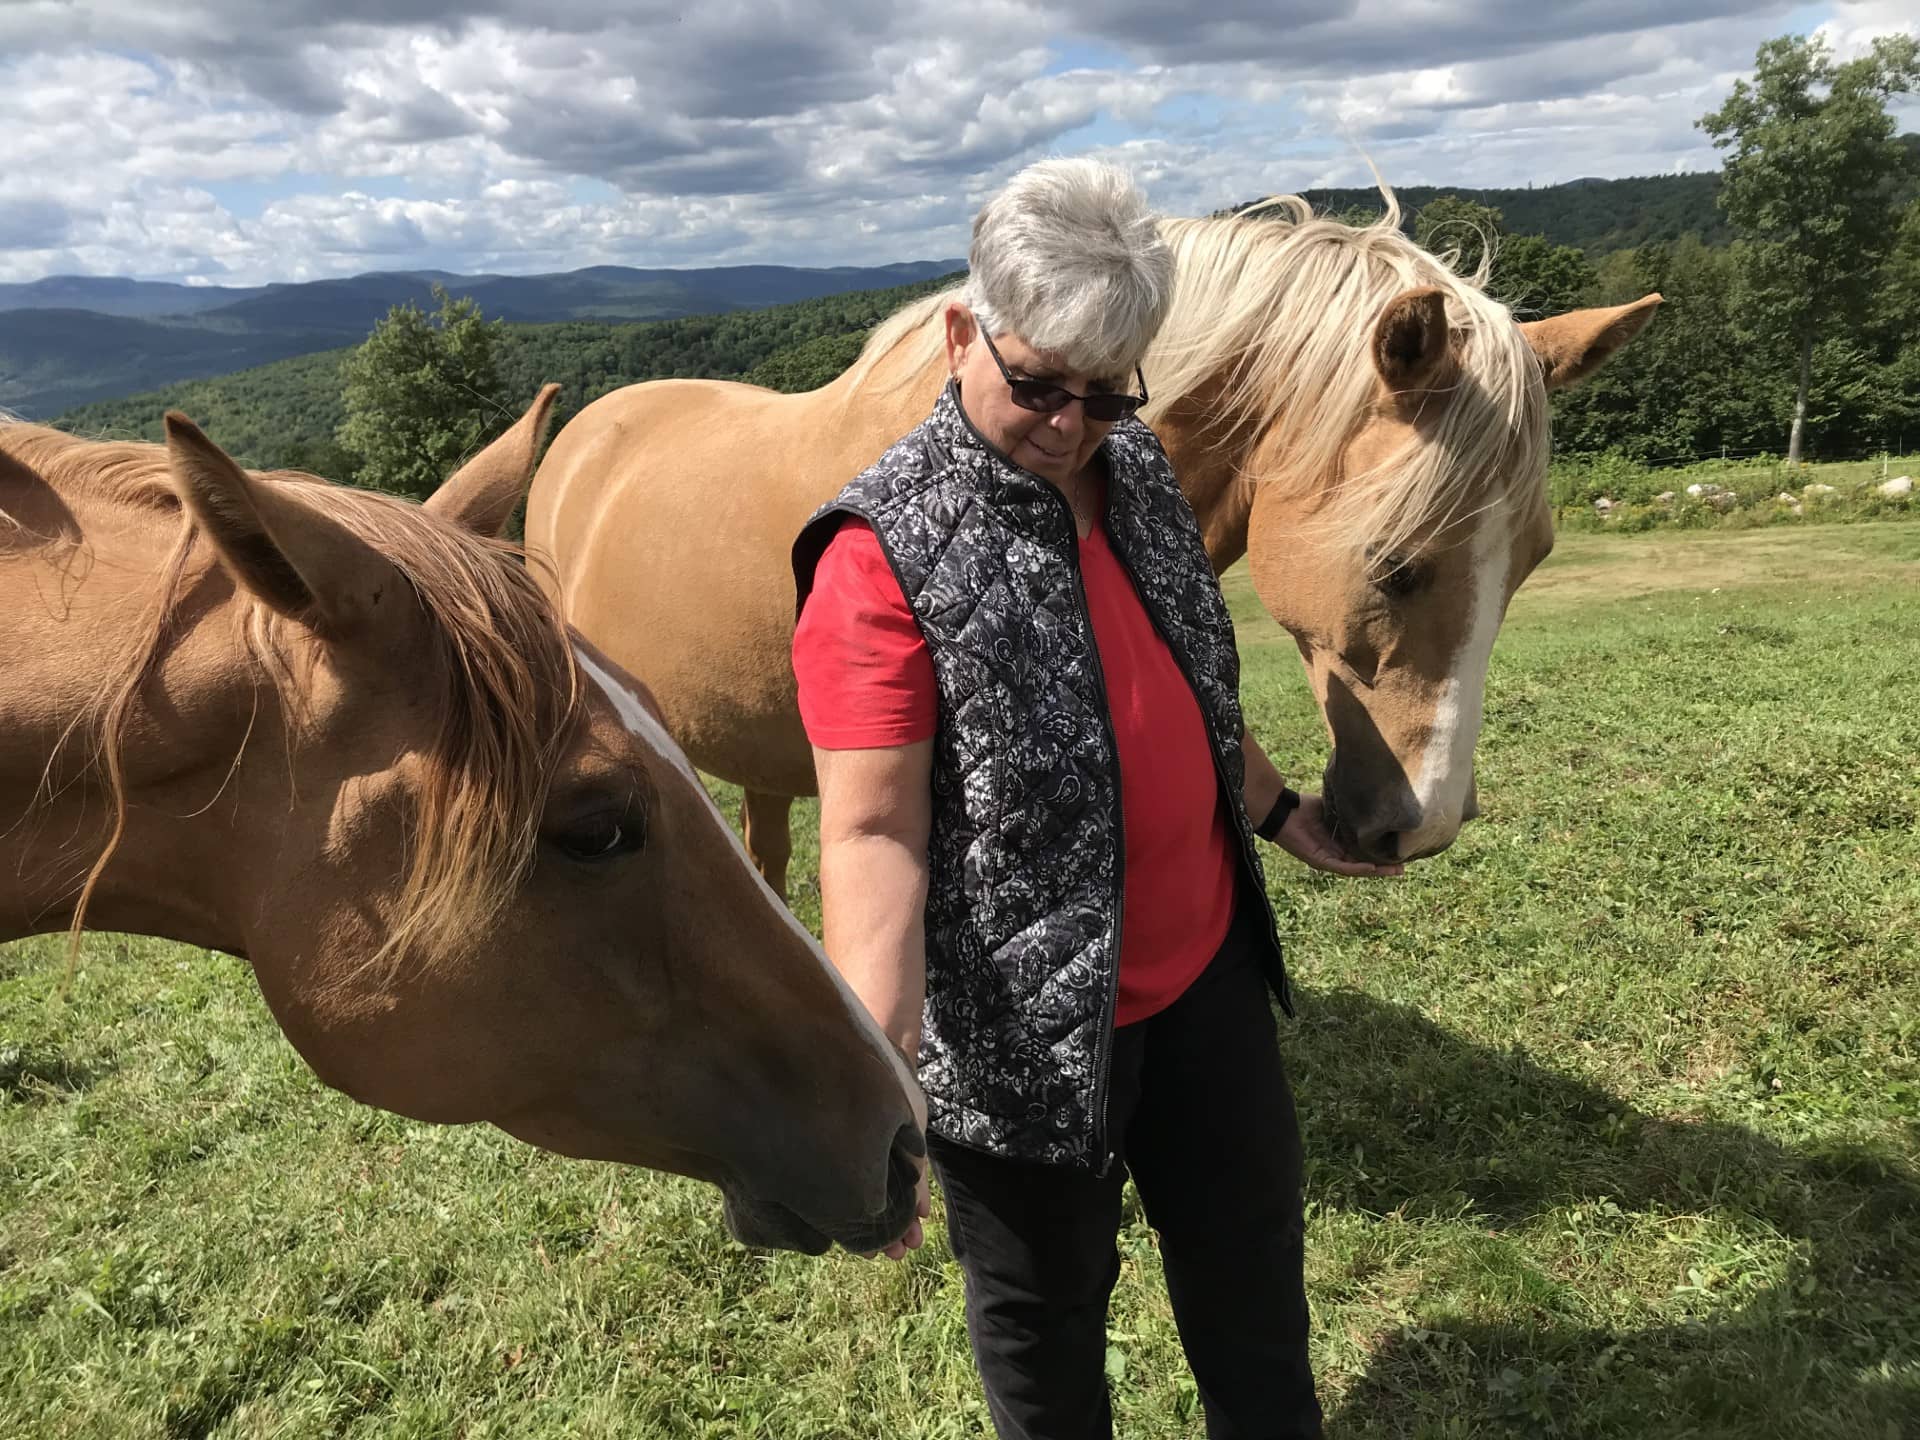 kathy with two horses